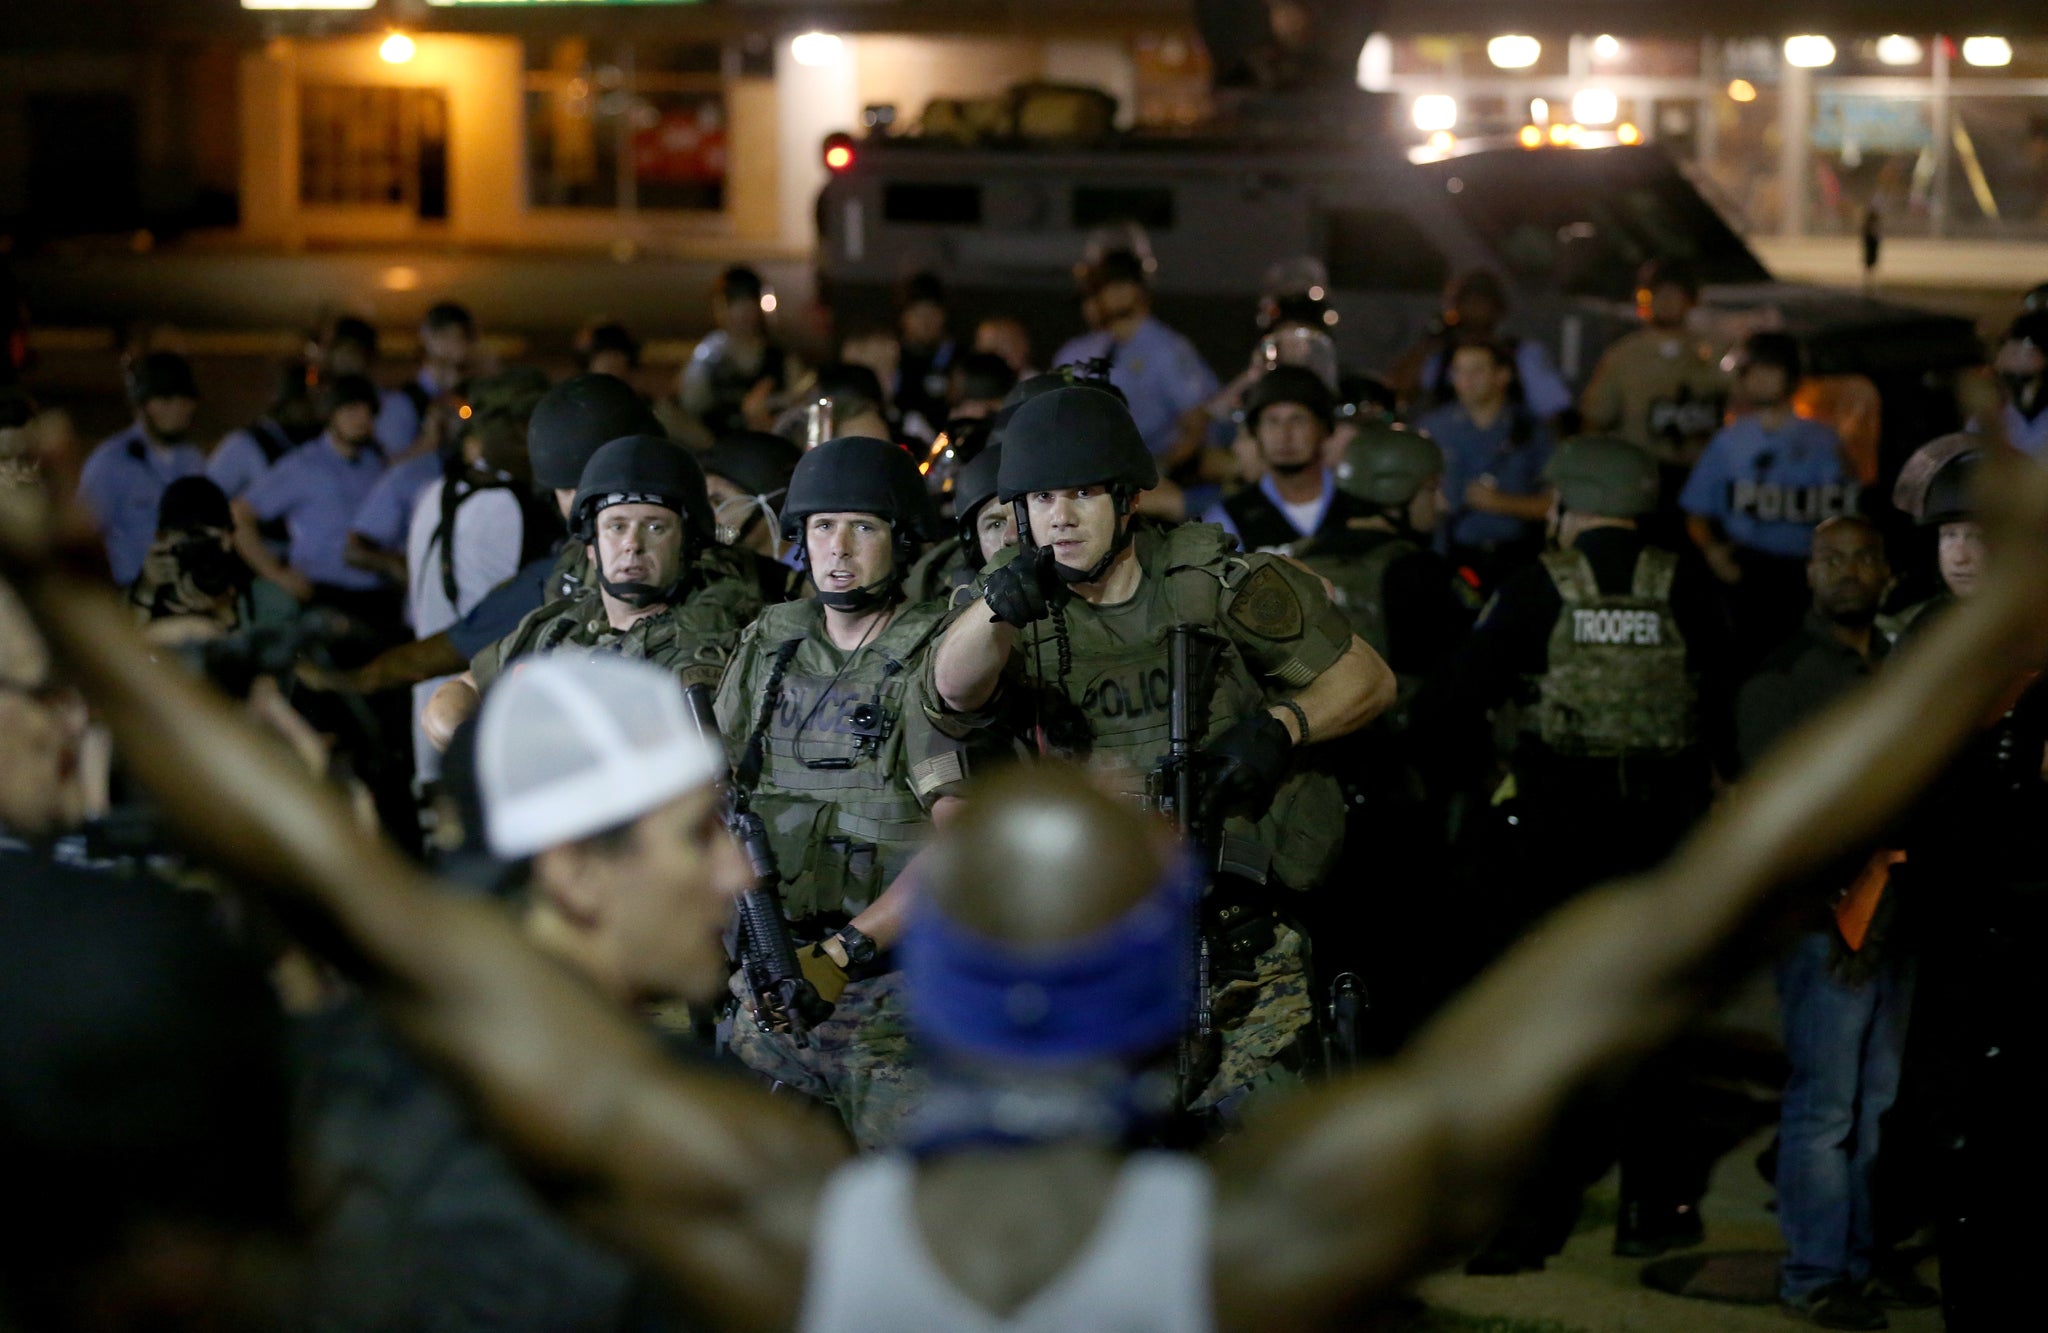 Police point to a demonstrator before arresting him on 19 August 2014 in Ferguson, Missouri.